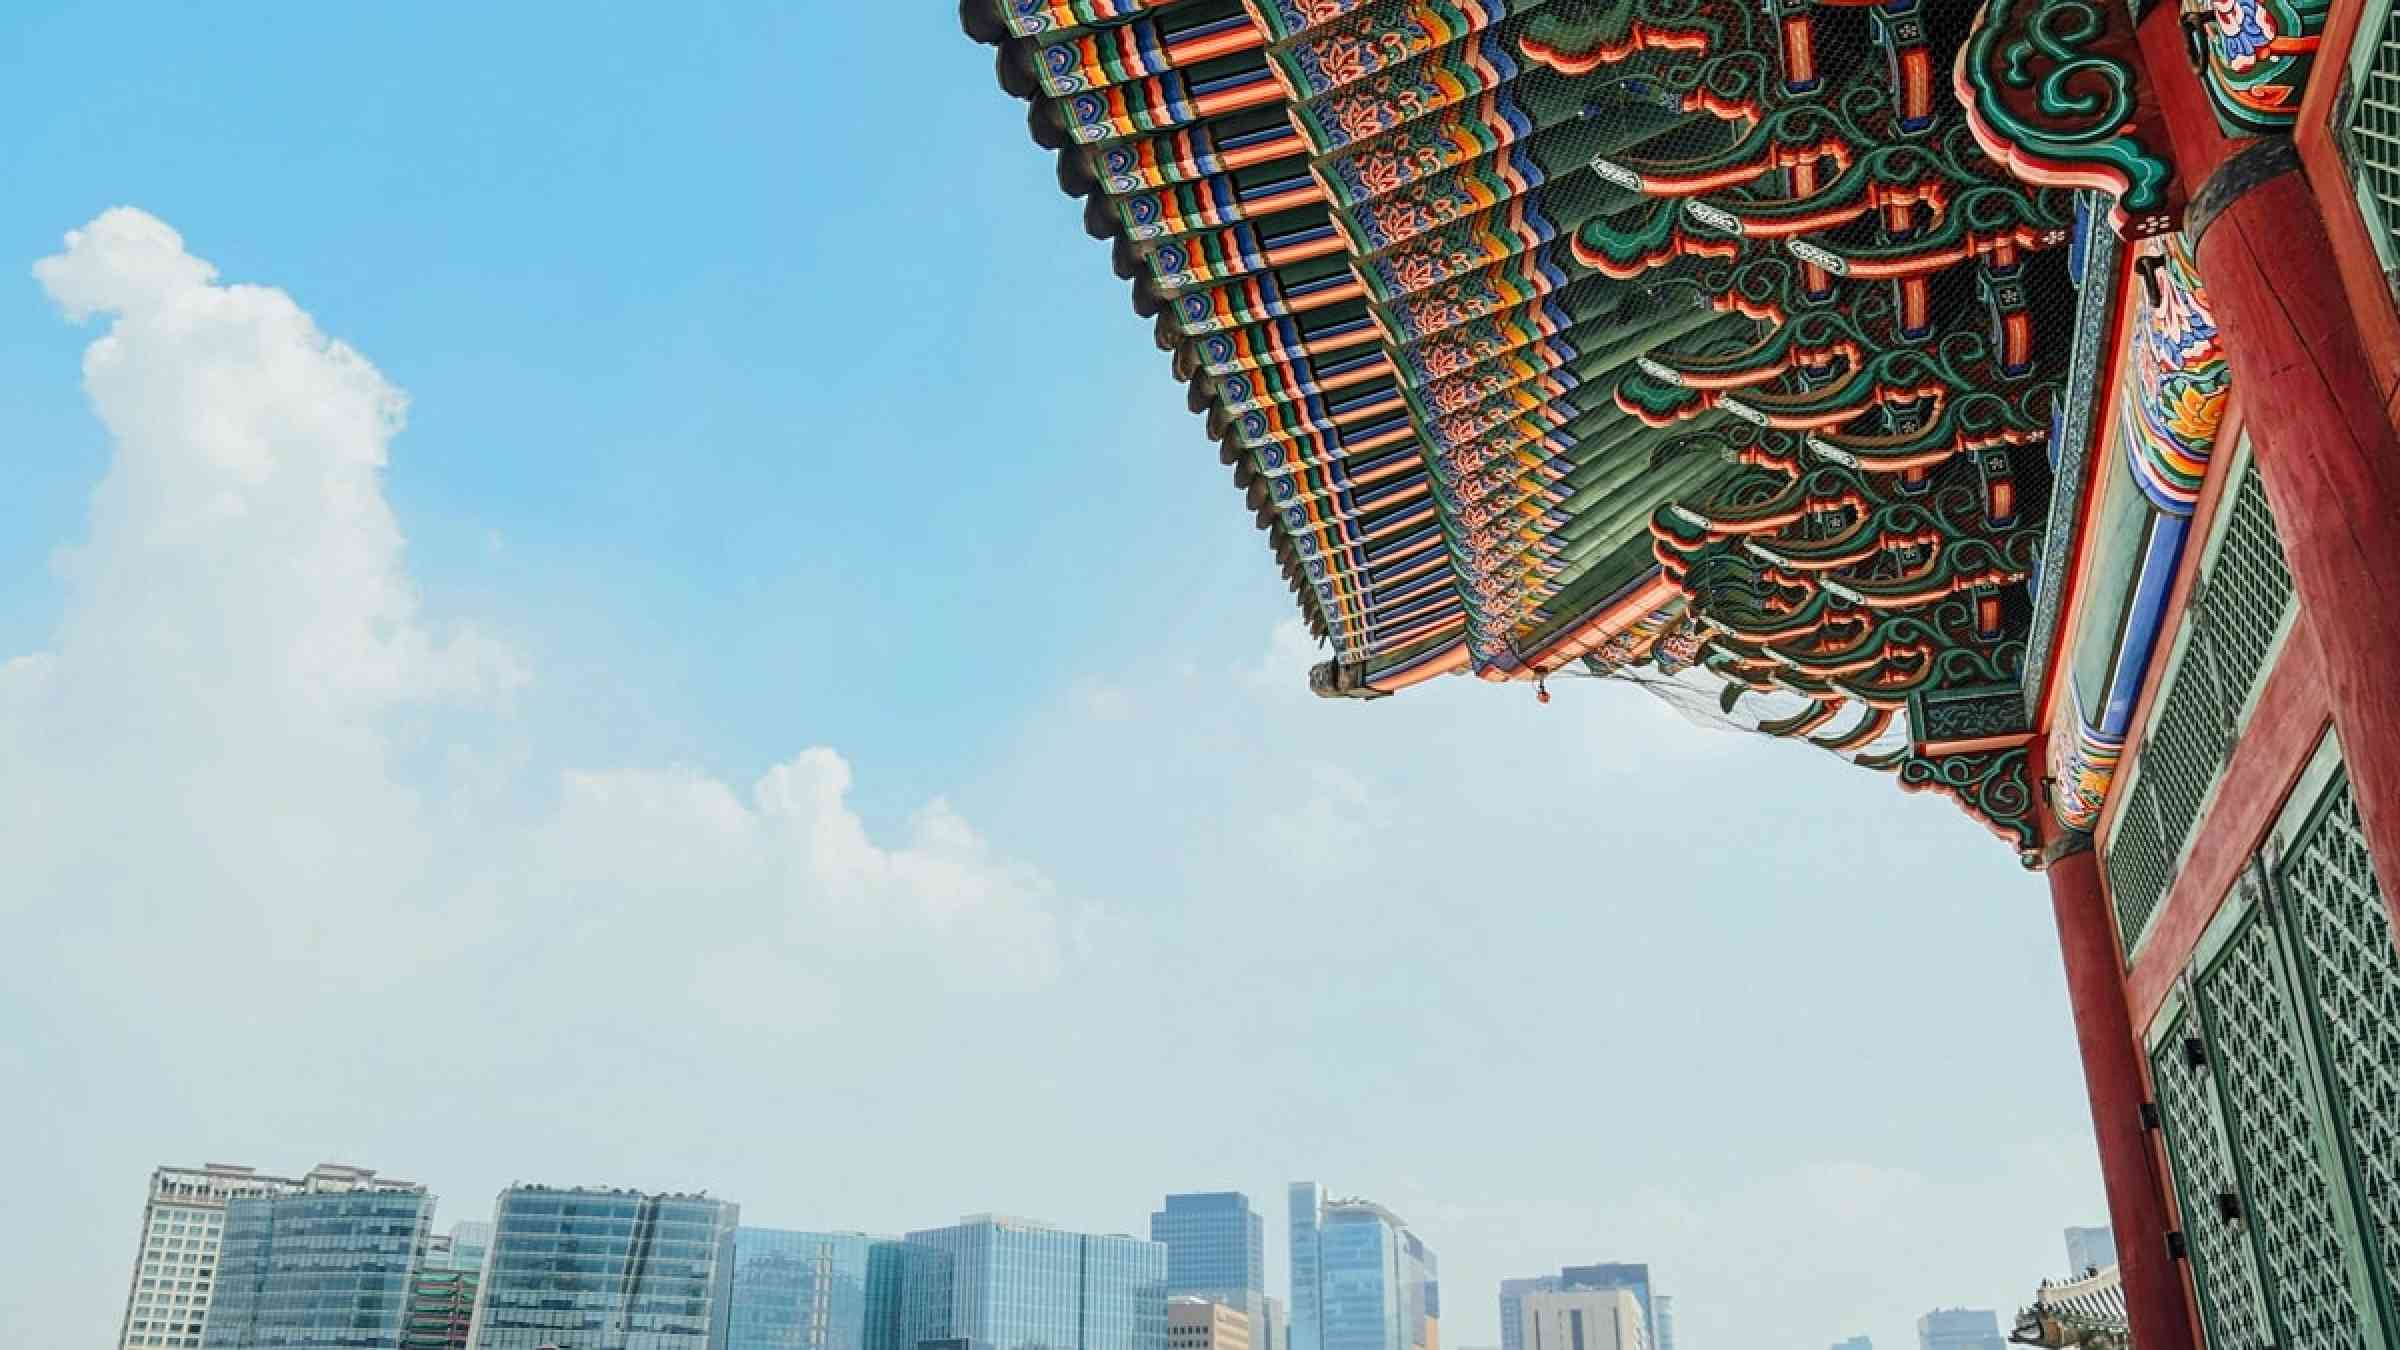 photo of Korean traditional building and modern buildings in Seoul